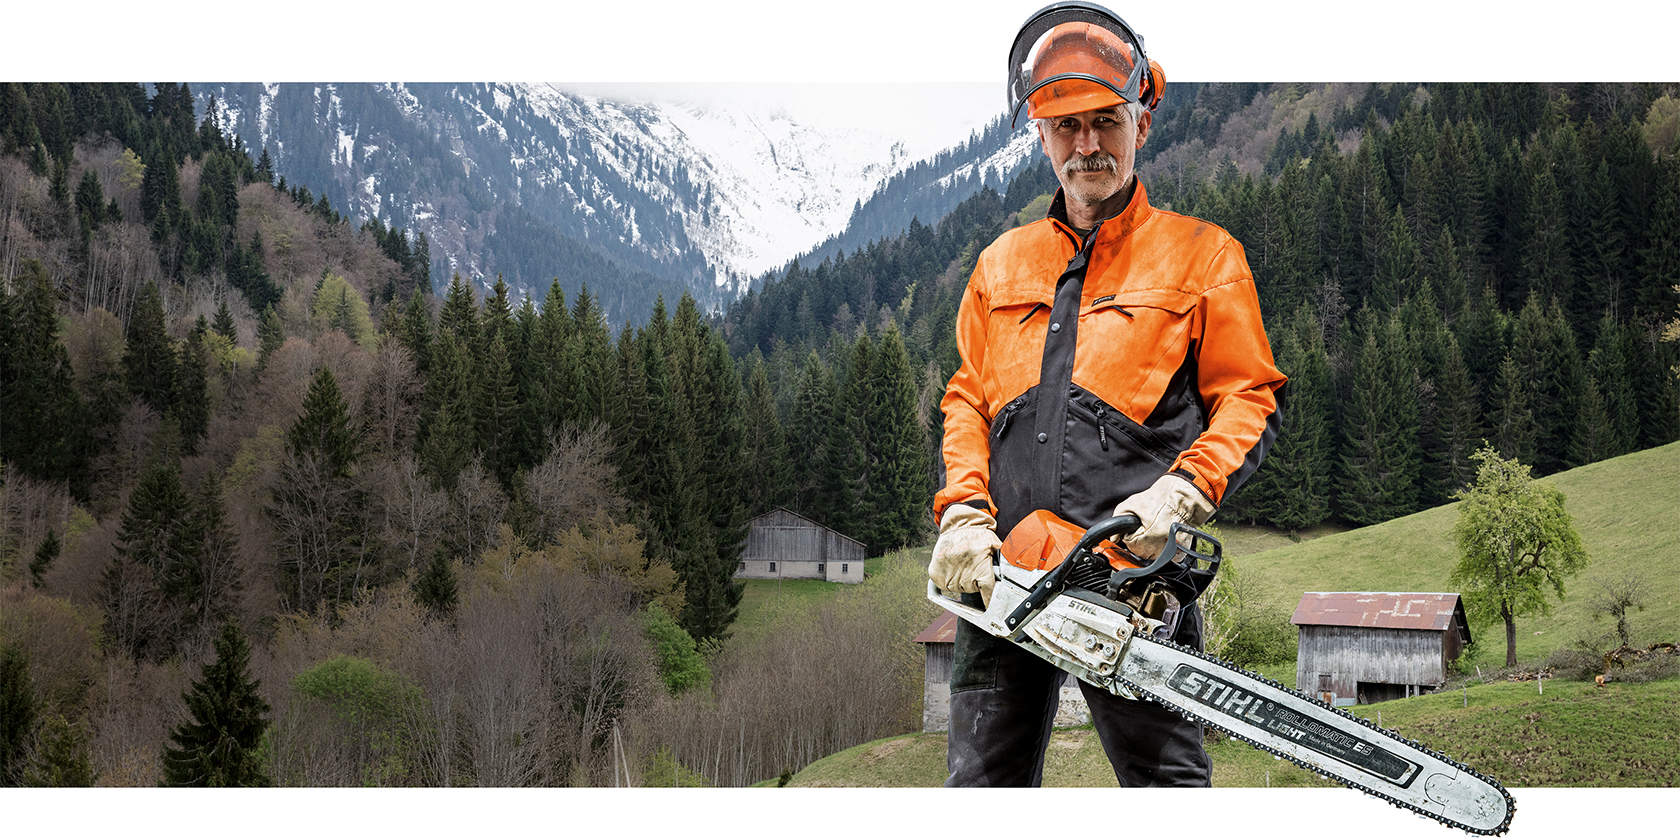 Gets going when things get tough: Jean-Charles speaking about the weight and acceleration of the STIHL MS 462.